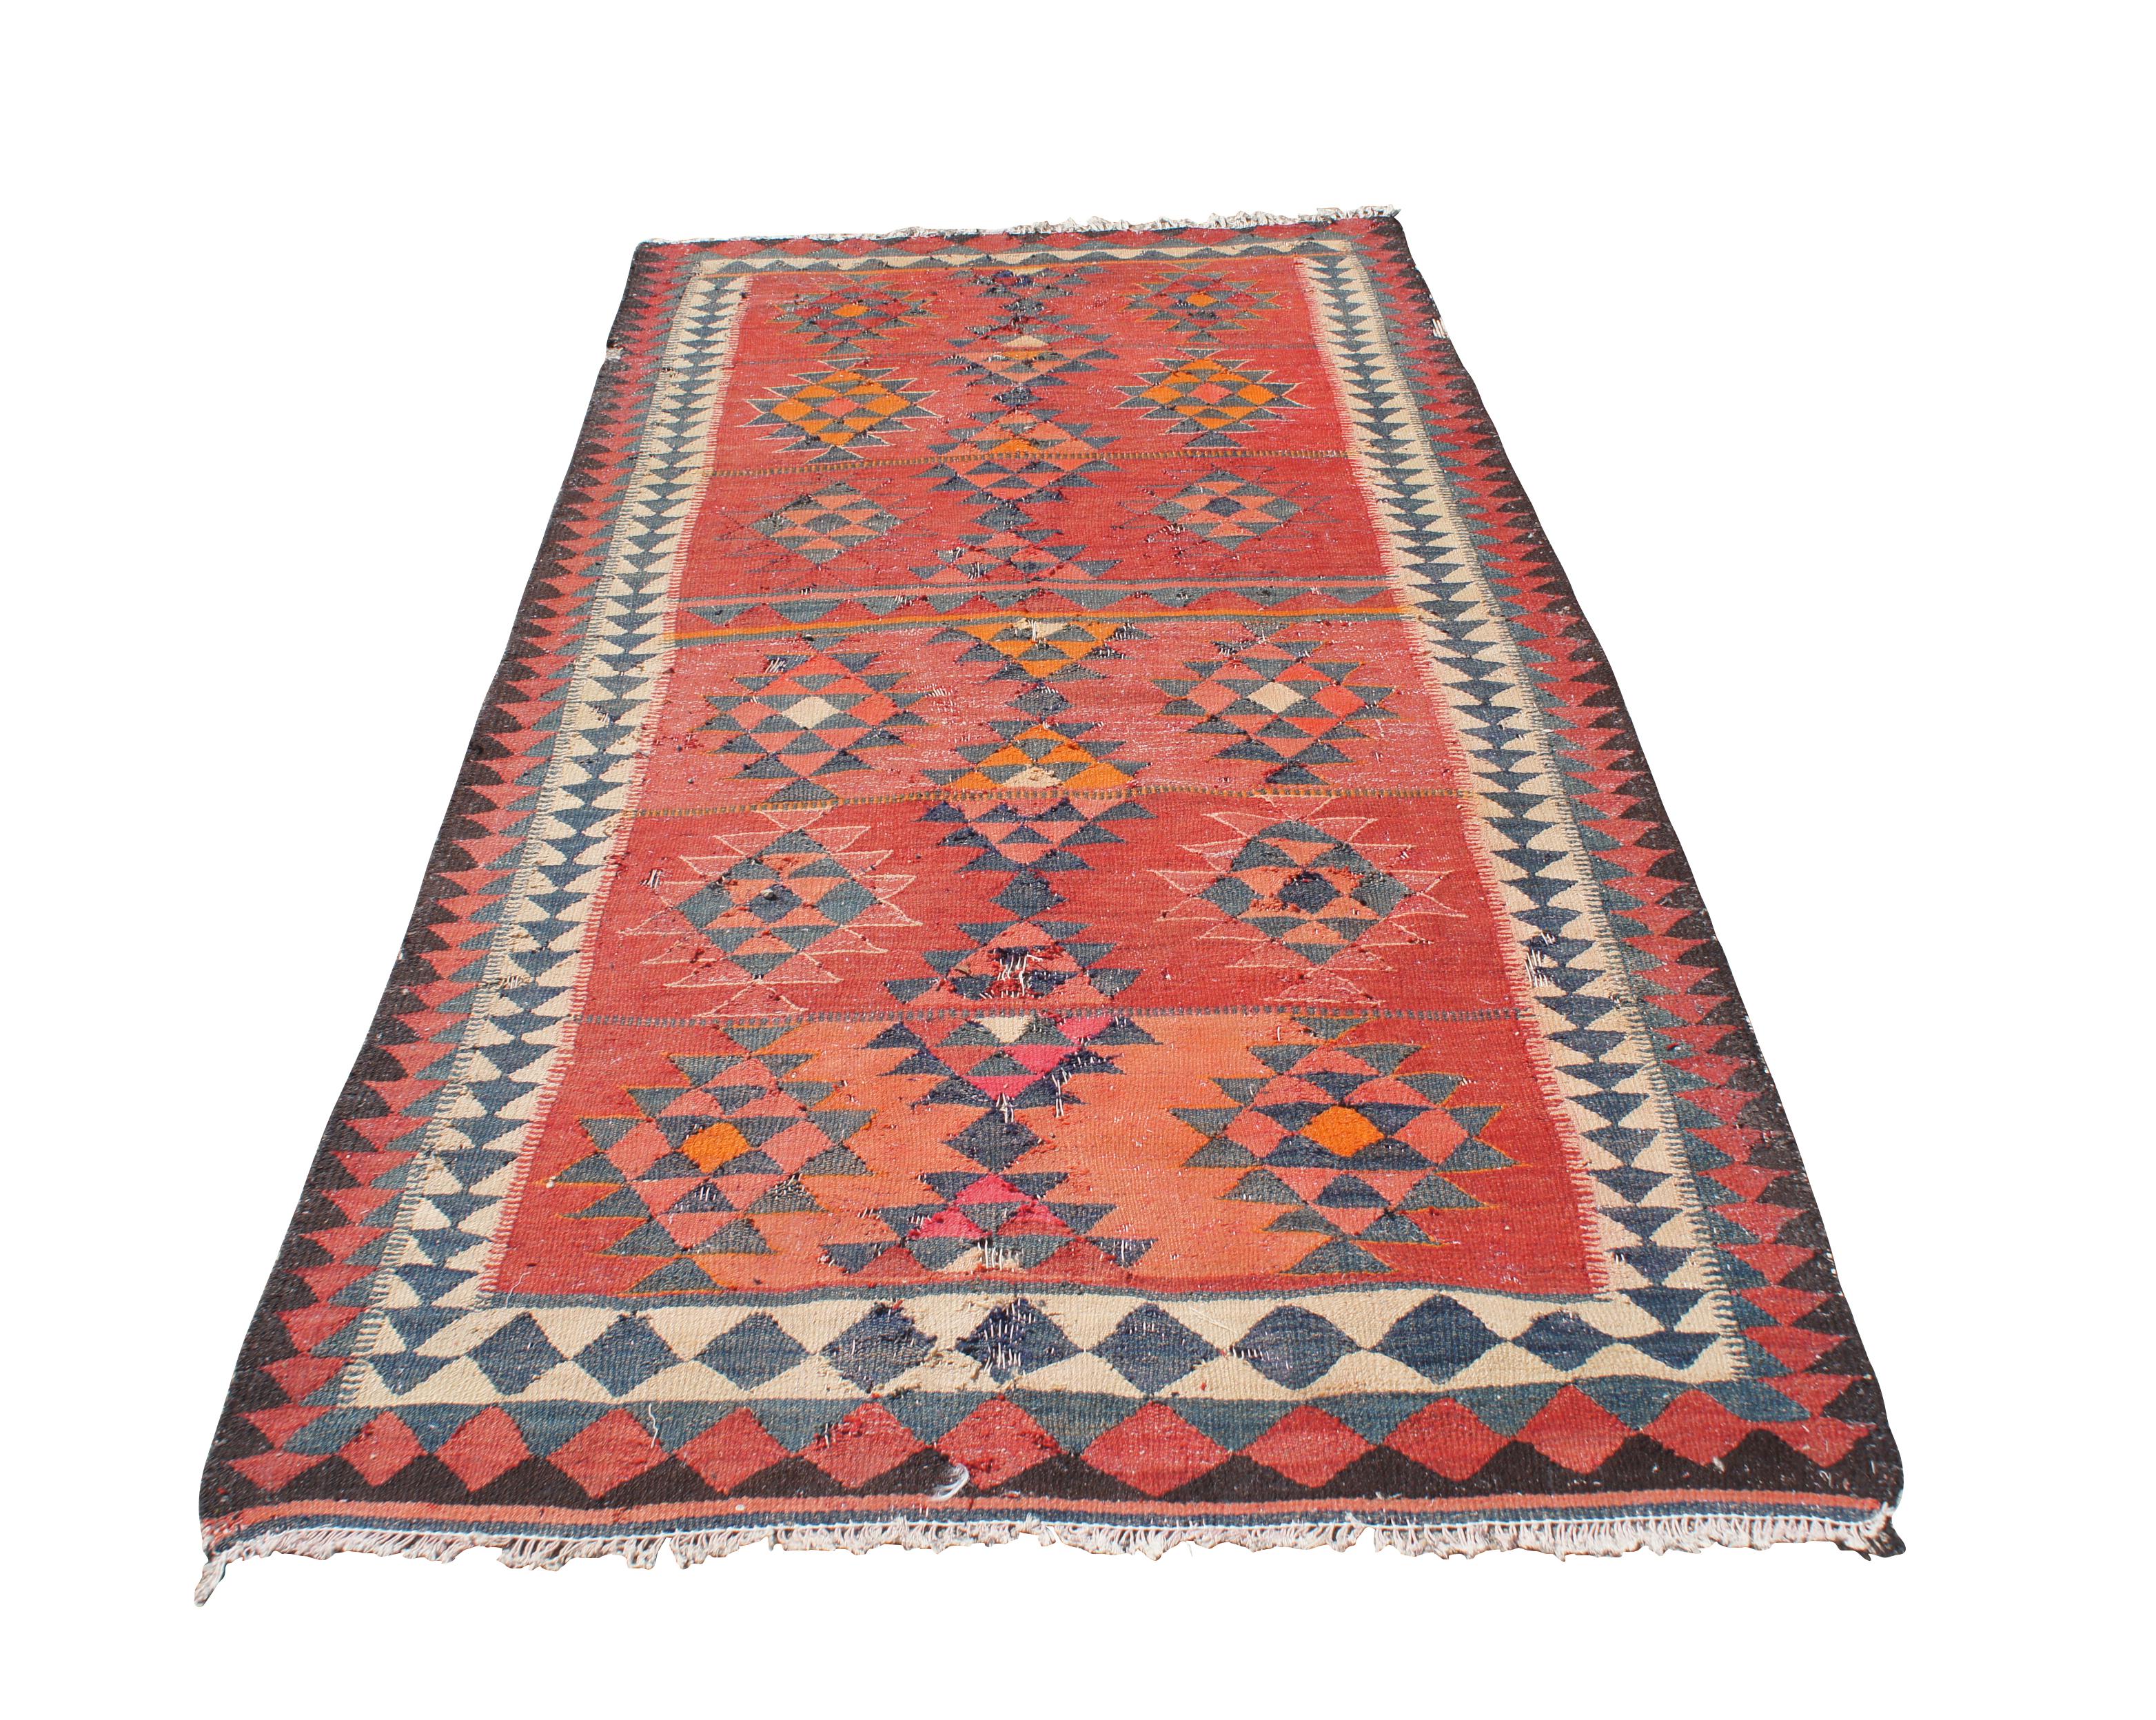 Vintage Turkish Flat Weave Oushak Bohemian Kilim Wool Area Rug Runner 5 x 8.5' In Good Condition For Sale In Dayton, OH